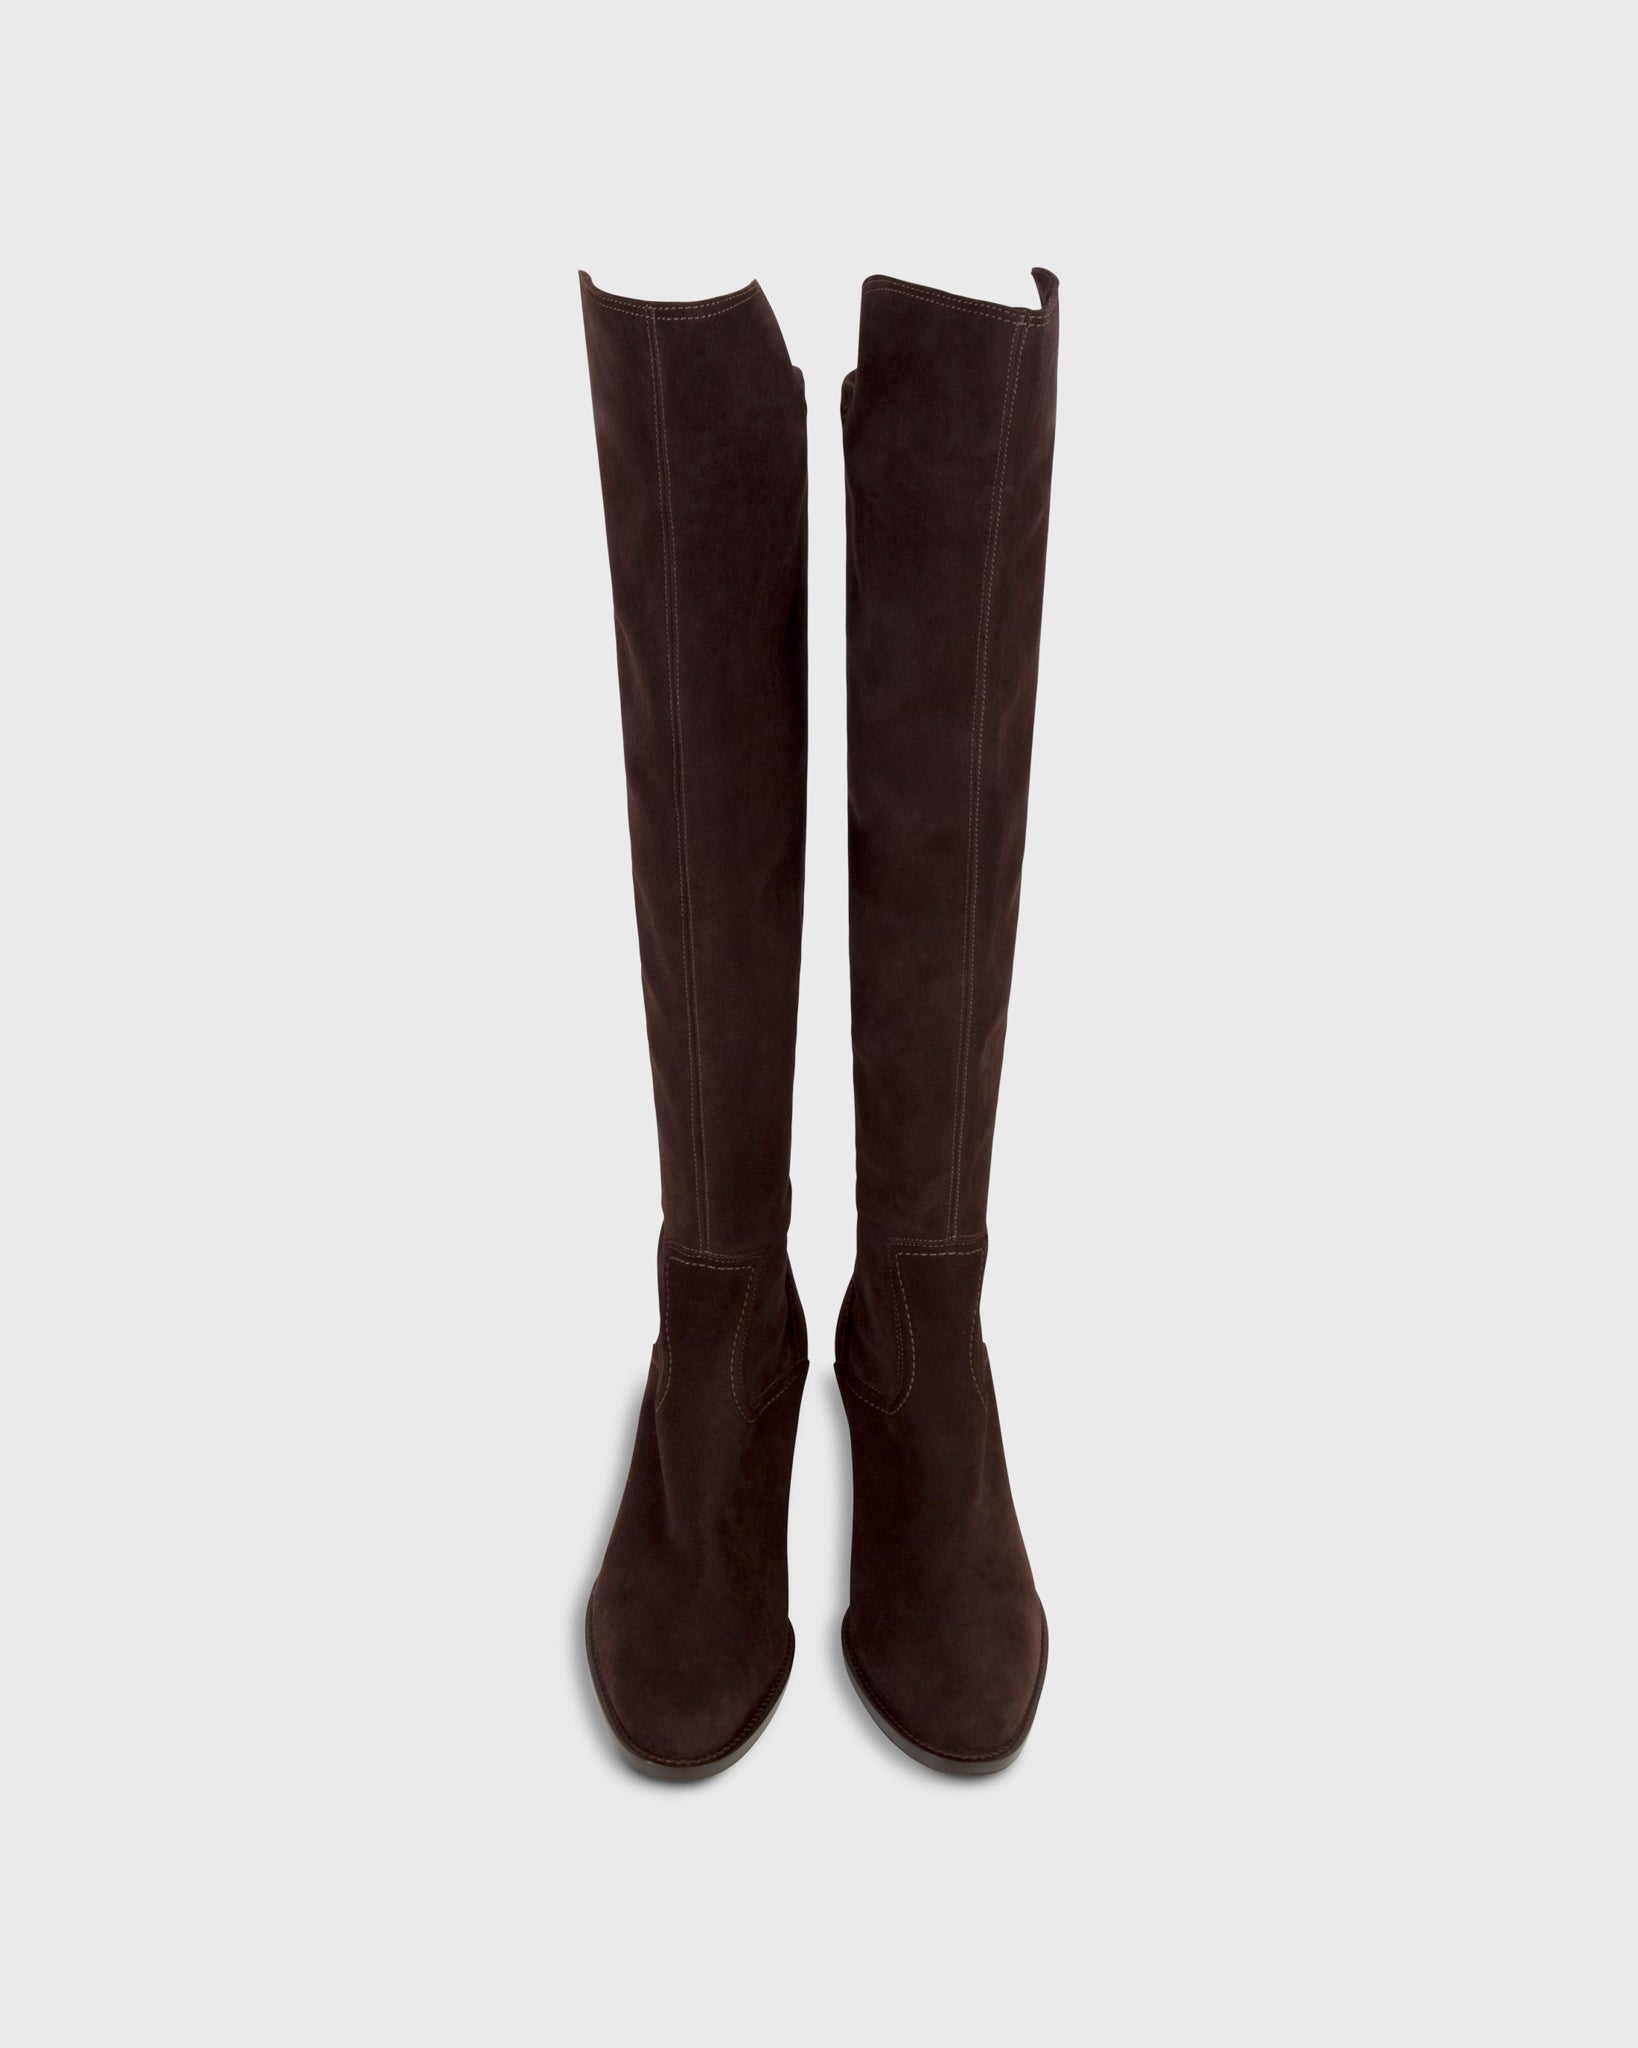 Heeled Pull-On Boot in Chocolate Suede